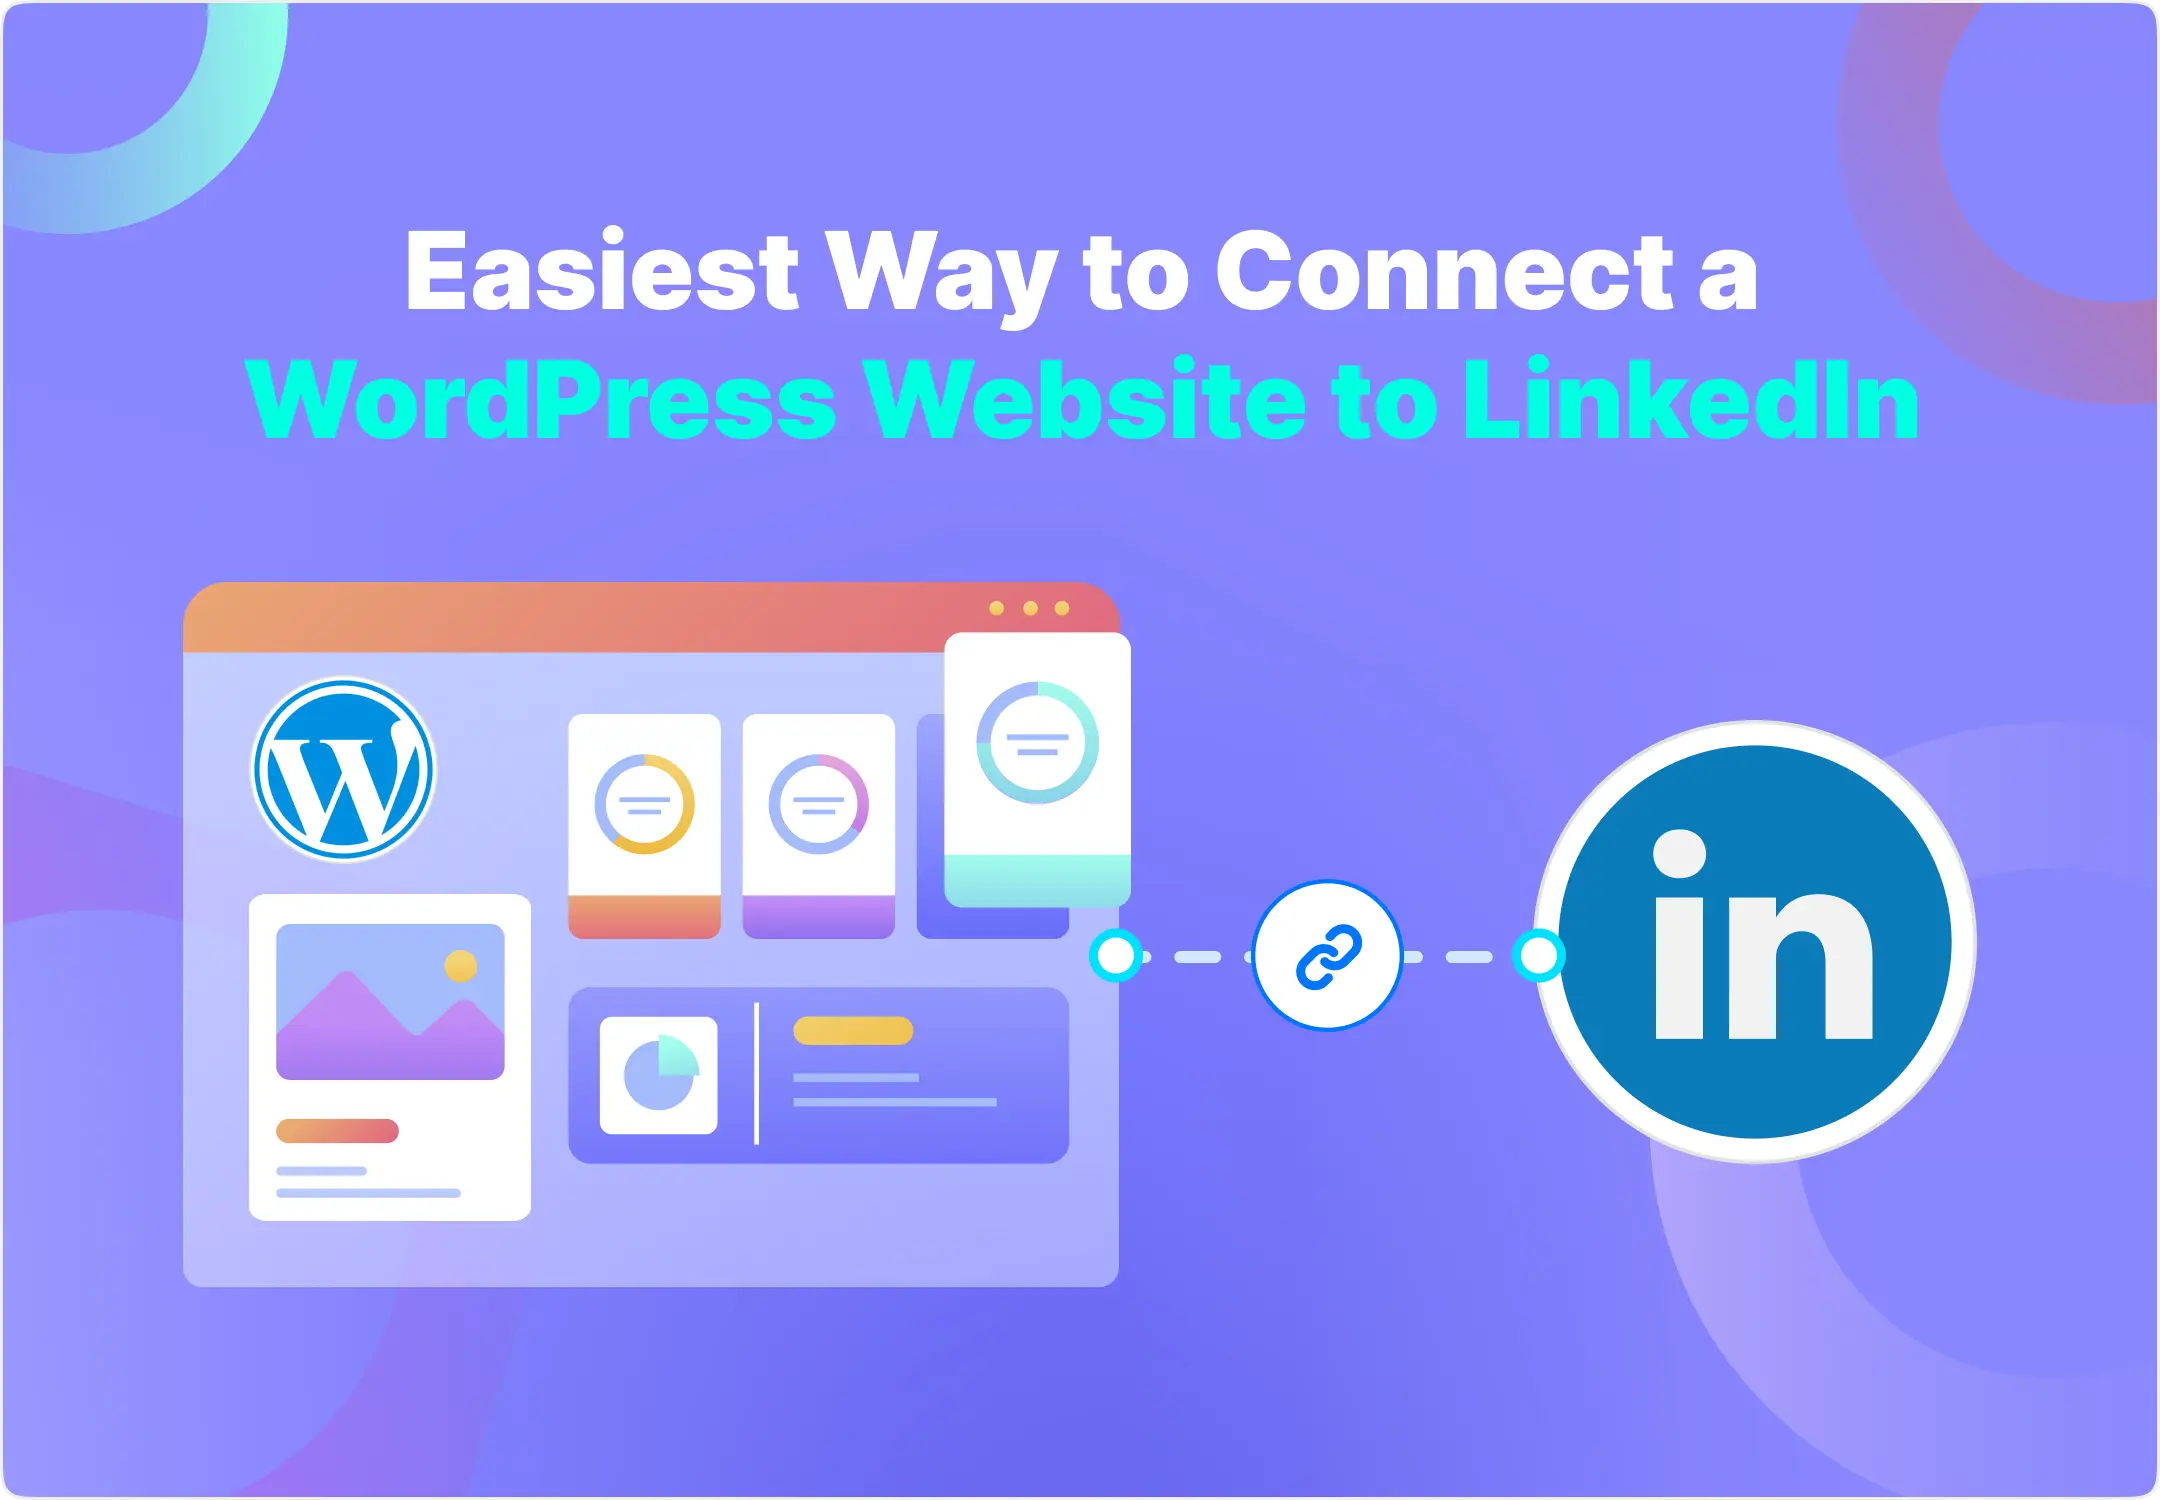 how to connect LinkedIn to WordPress website